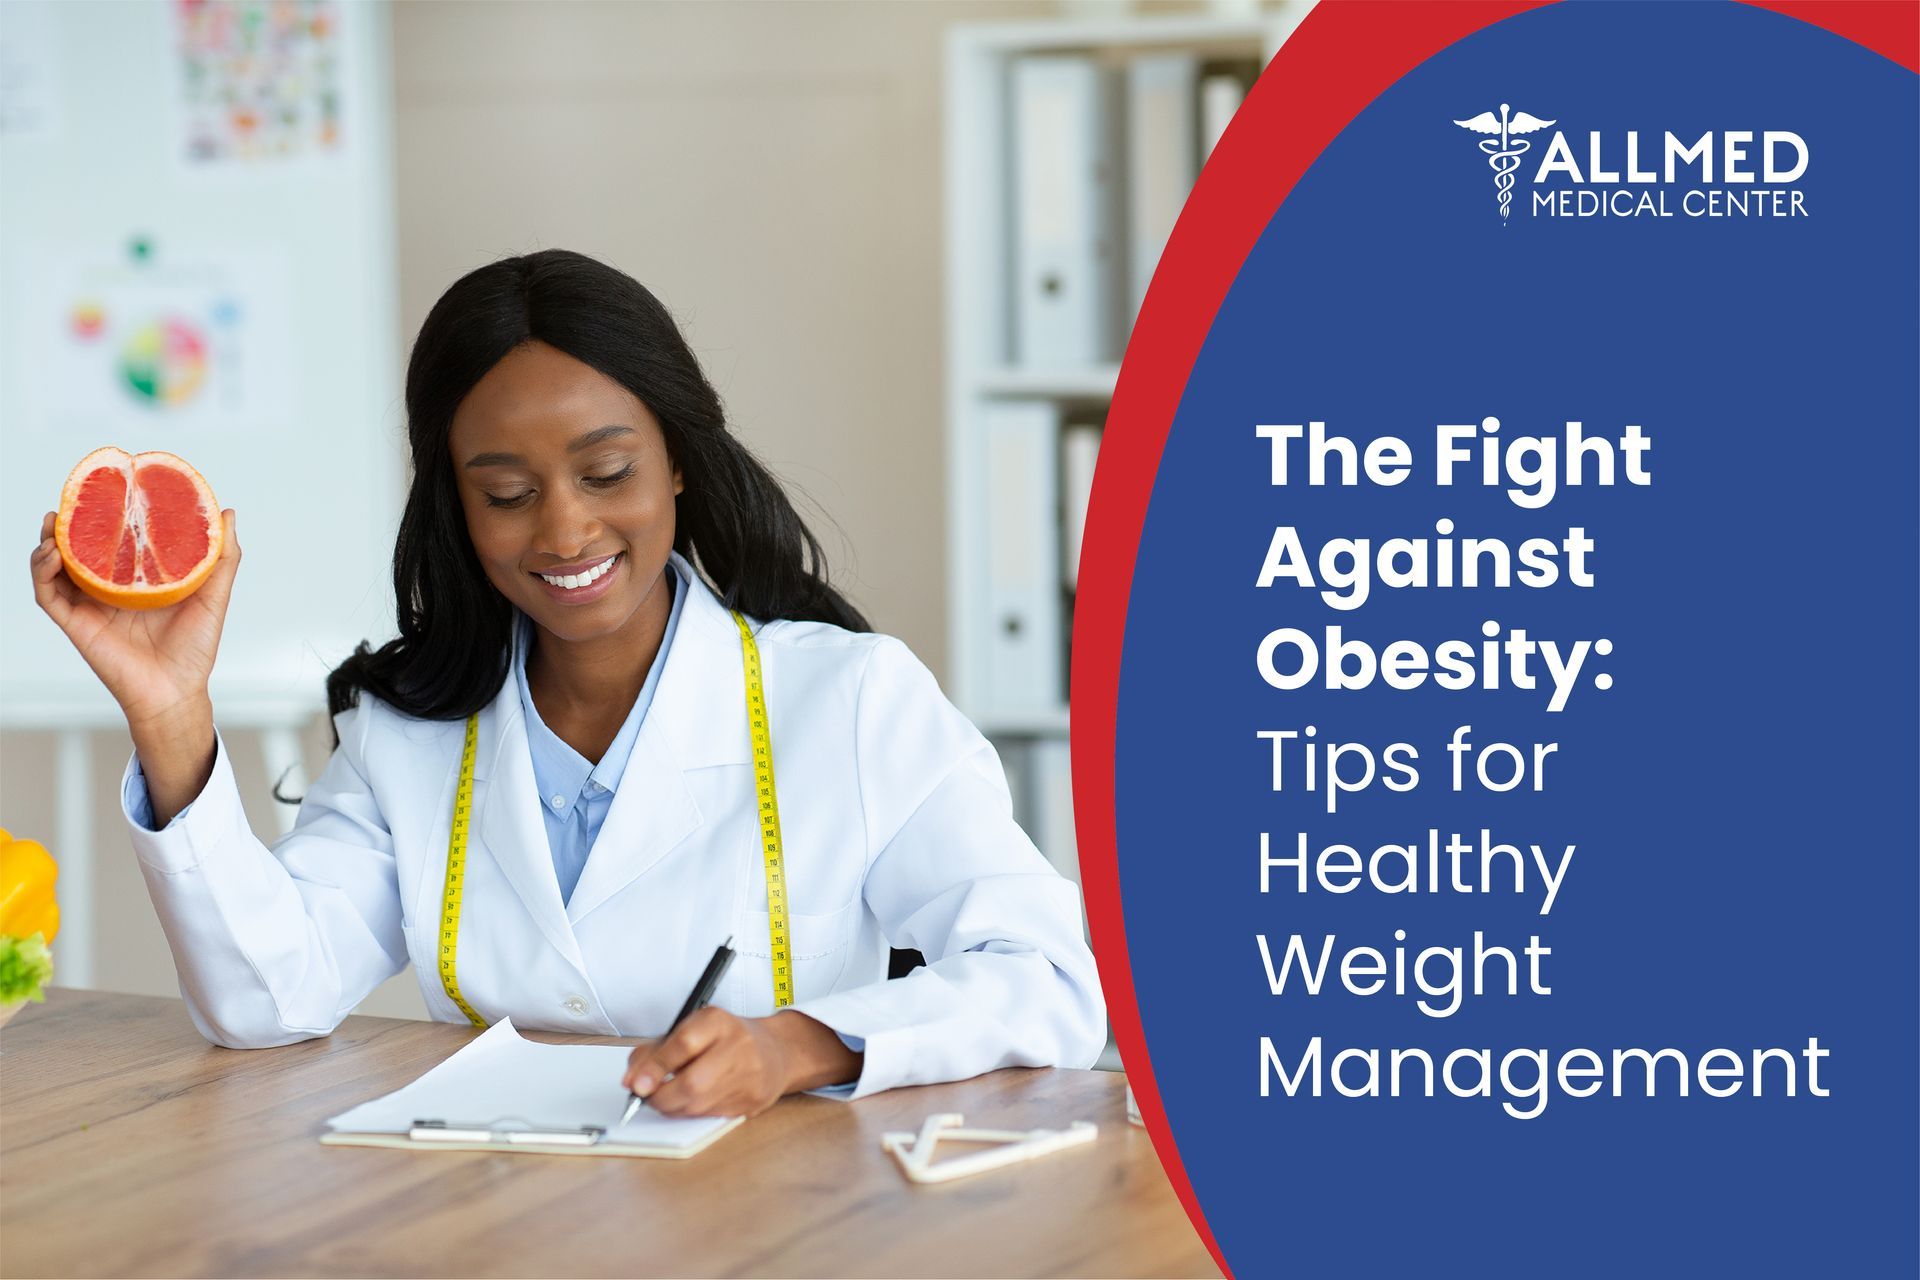 The Fight Against Obesity: Tips for Healthy Weight Management